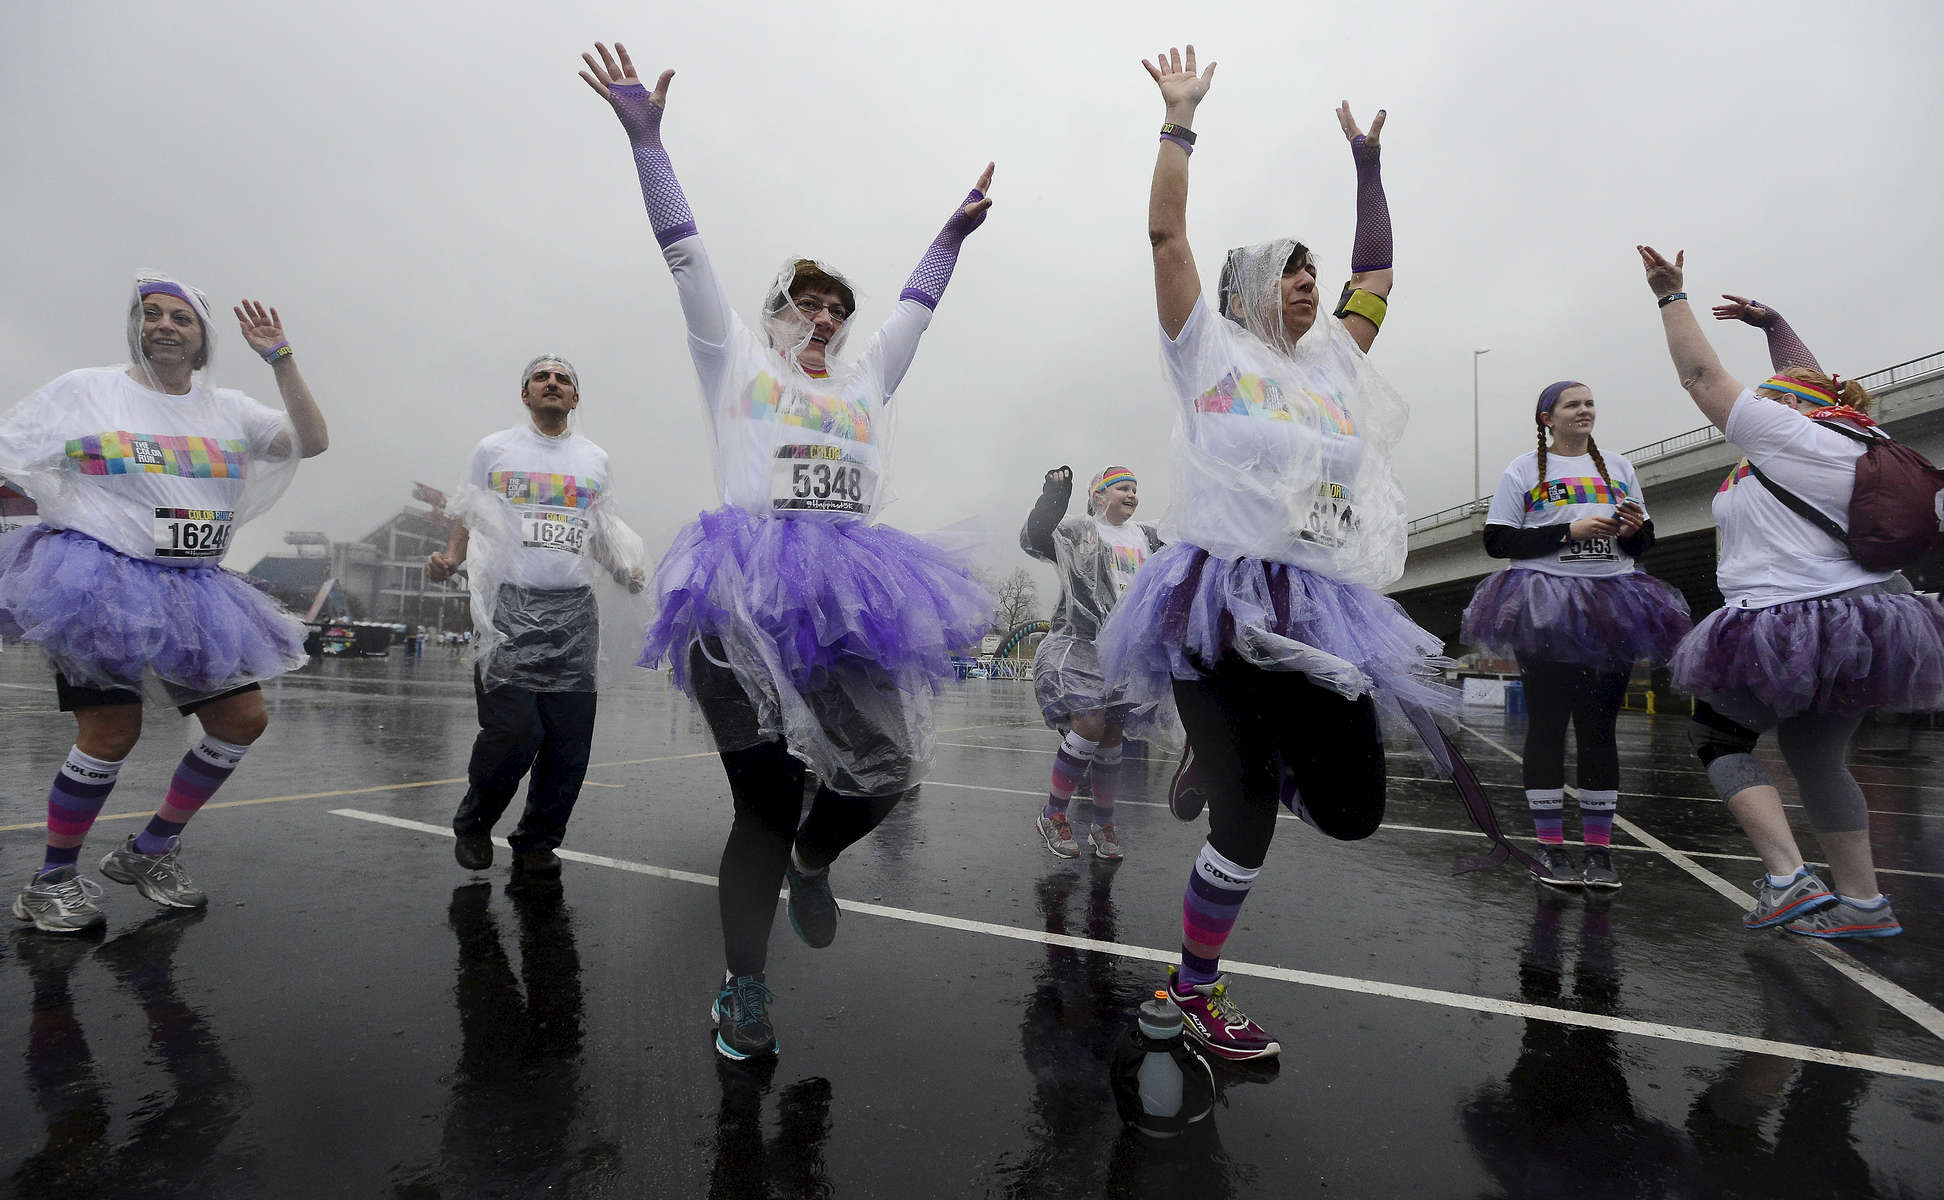 A group of women in tutus warm up in the rain before the 5K Color Run in Nashville, Tenn. (Mark Zaleski/ For The Tennessean)